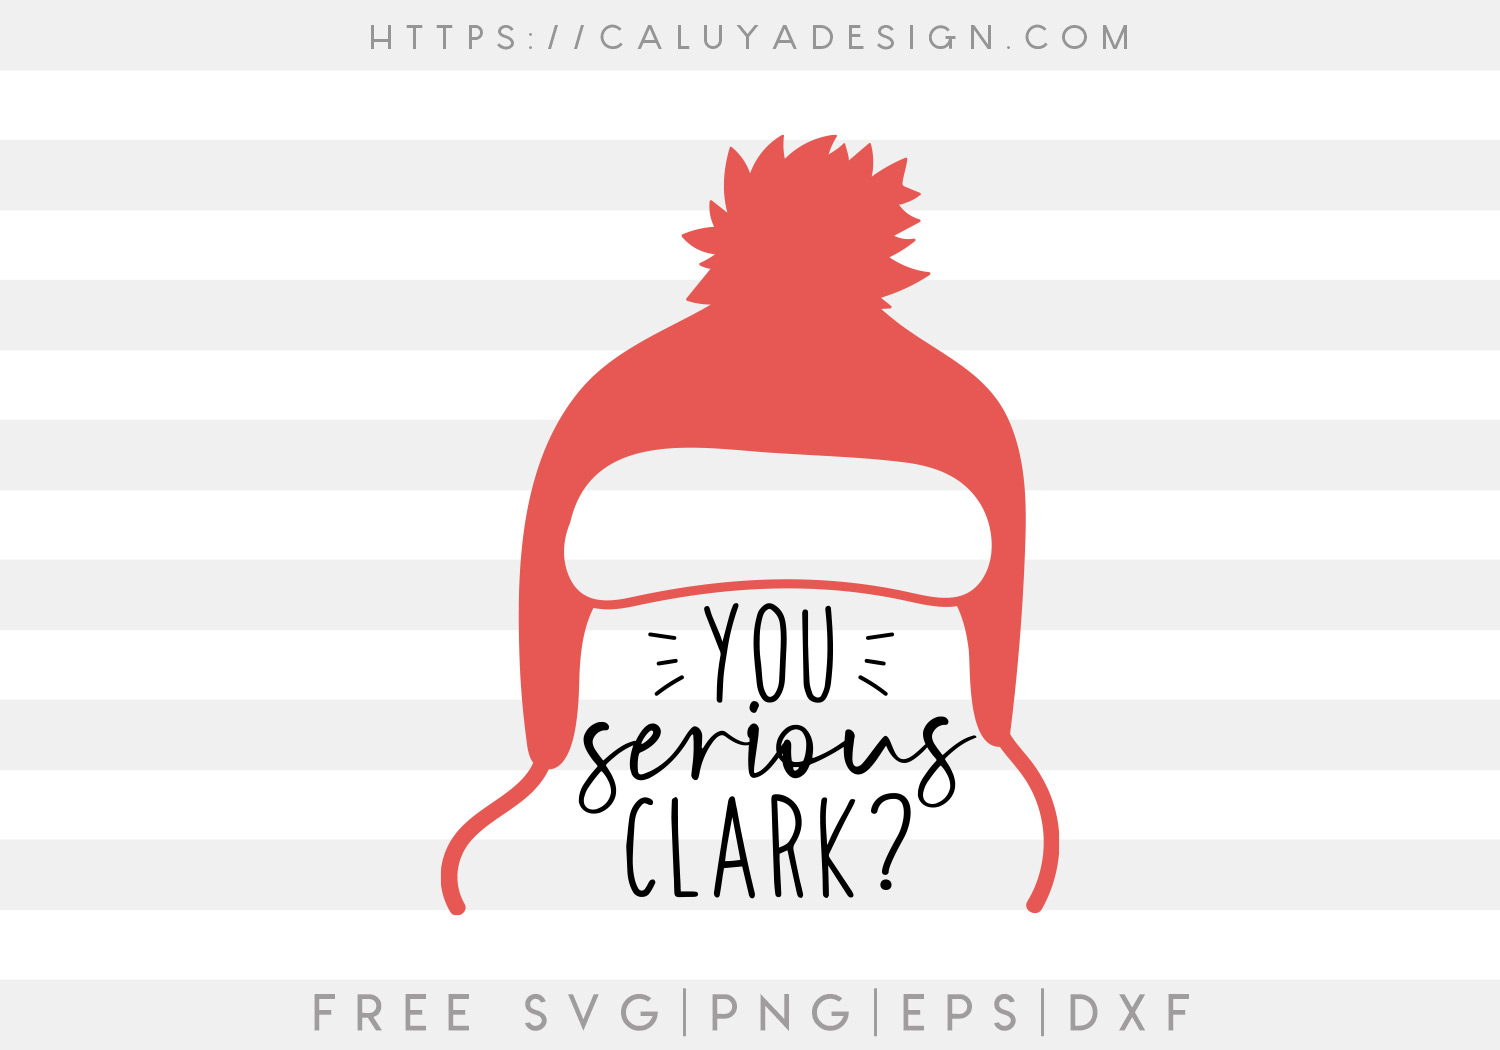 You Serious Clark? SVG, PNG, EPS & DXF